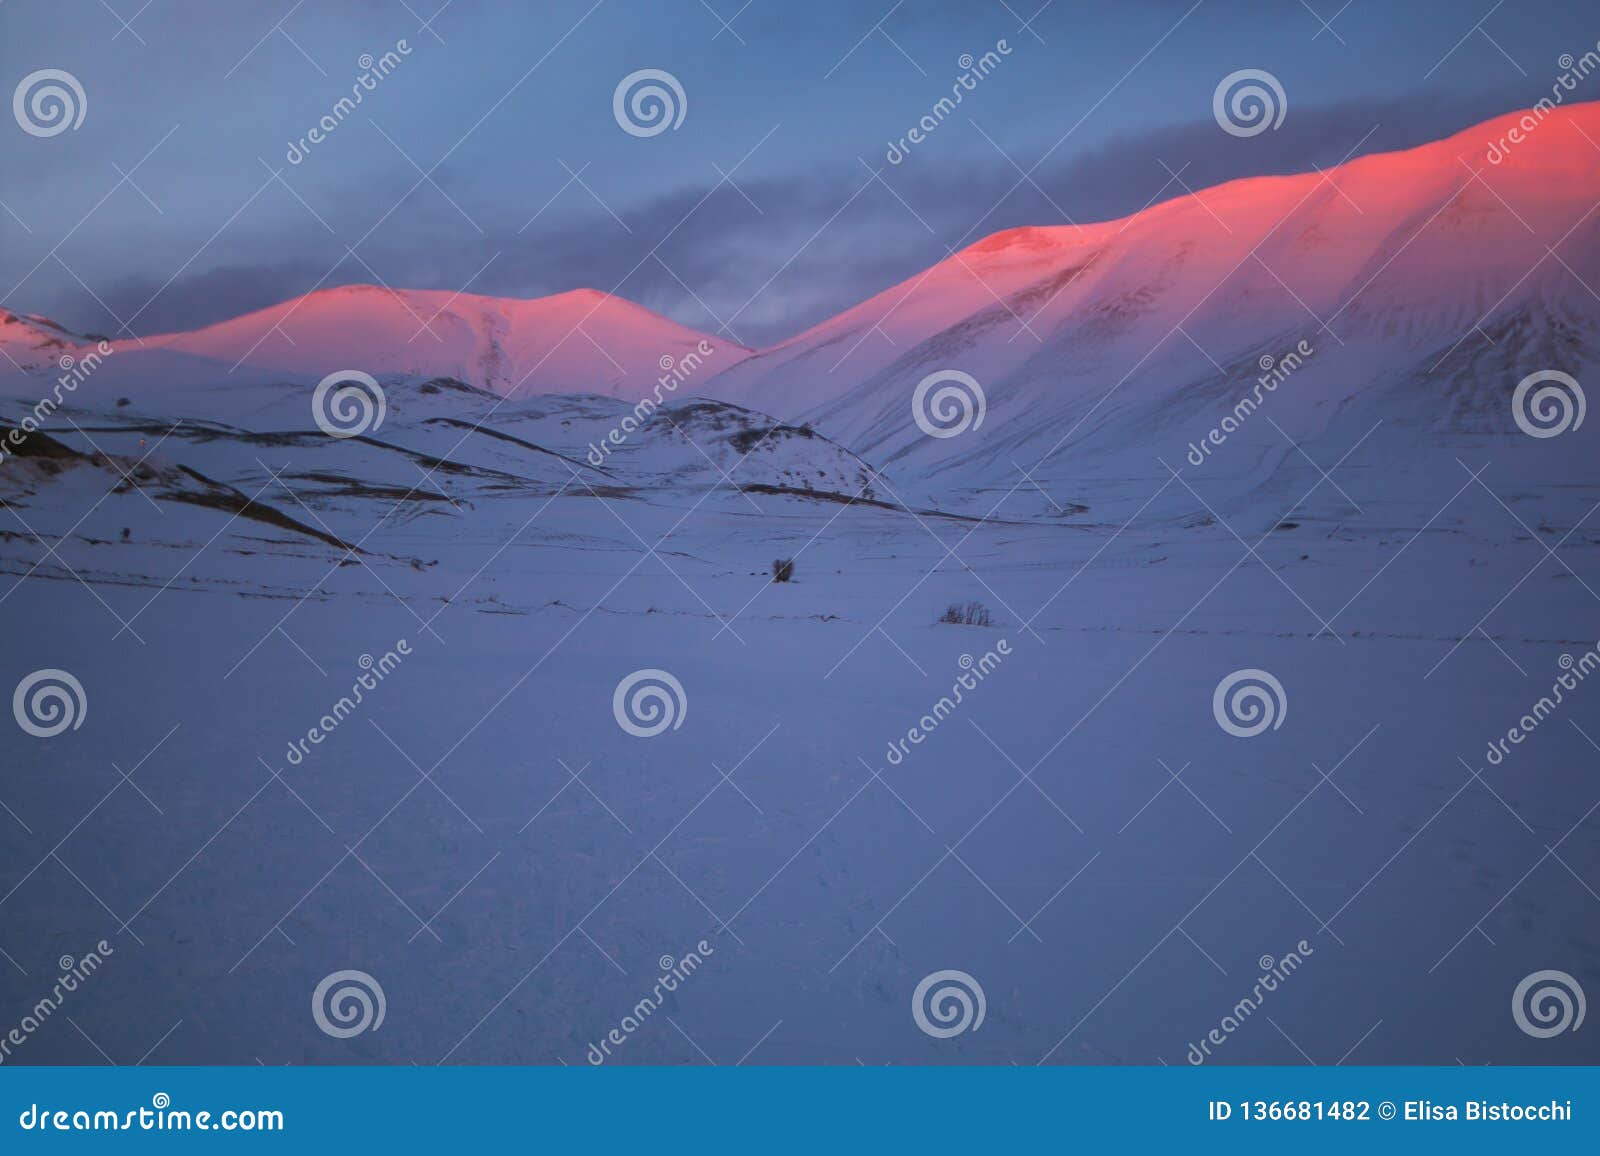 alpenglow phenomenon at the sunset on the peak of monte vettore in umbria, italy